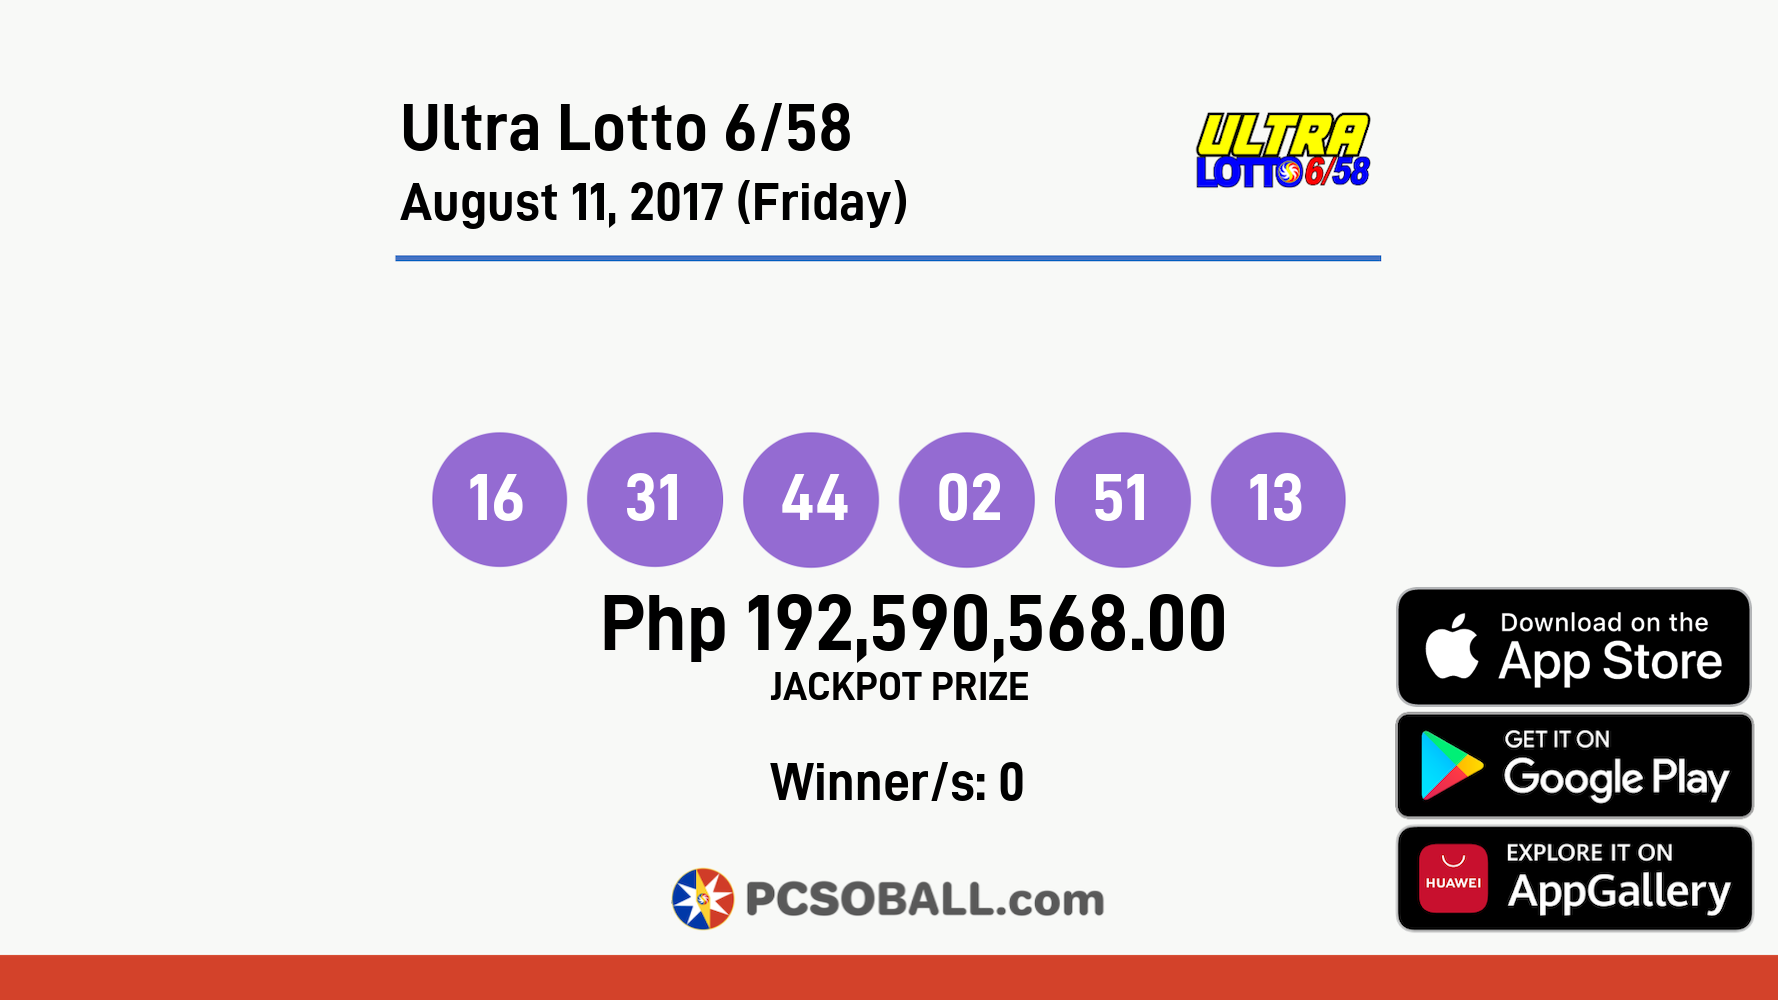 Ultra Lotto 6/58 August 11, 2017 (Friday) Result